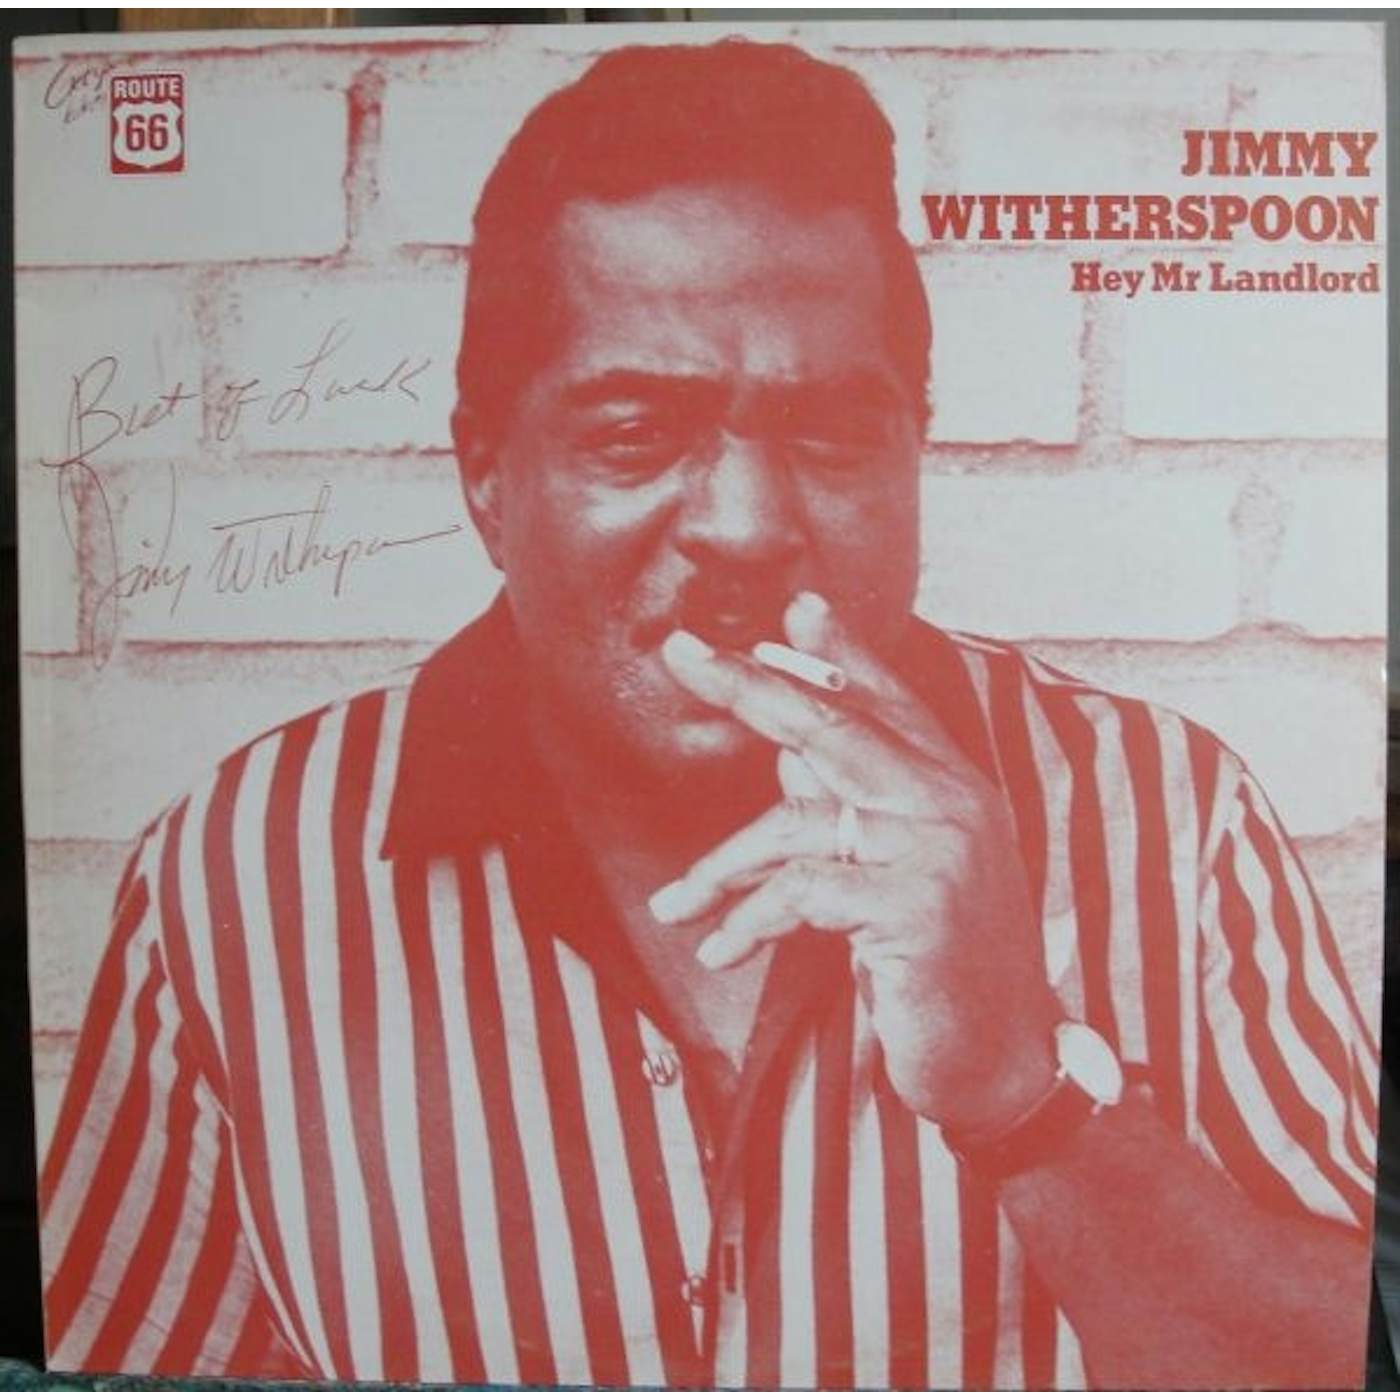 Jimmy Witherspoon HEY MR LANDLORD Vinyl Record